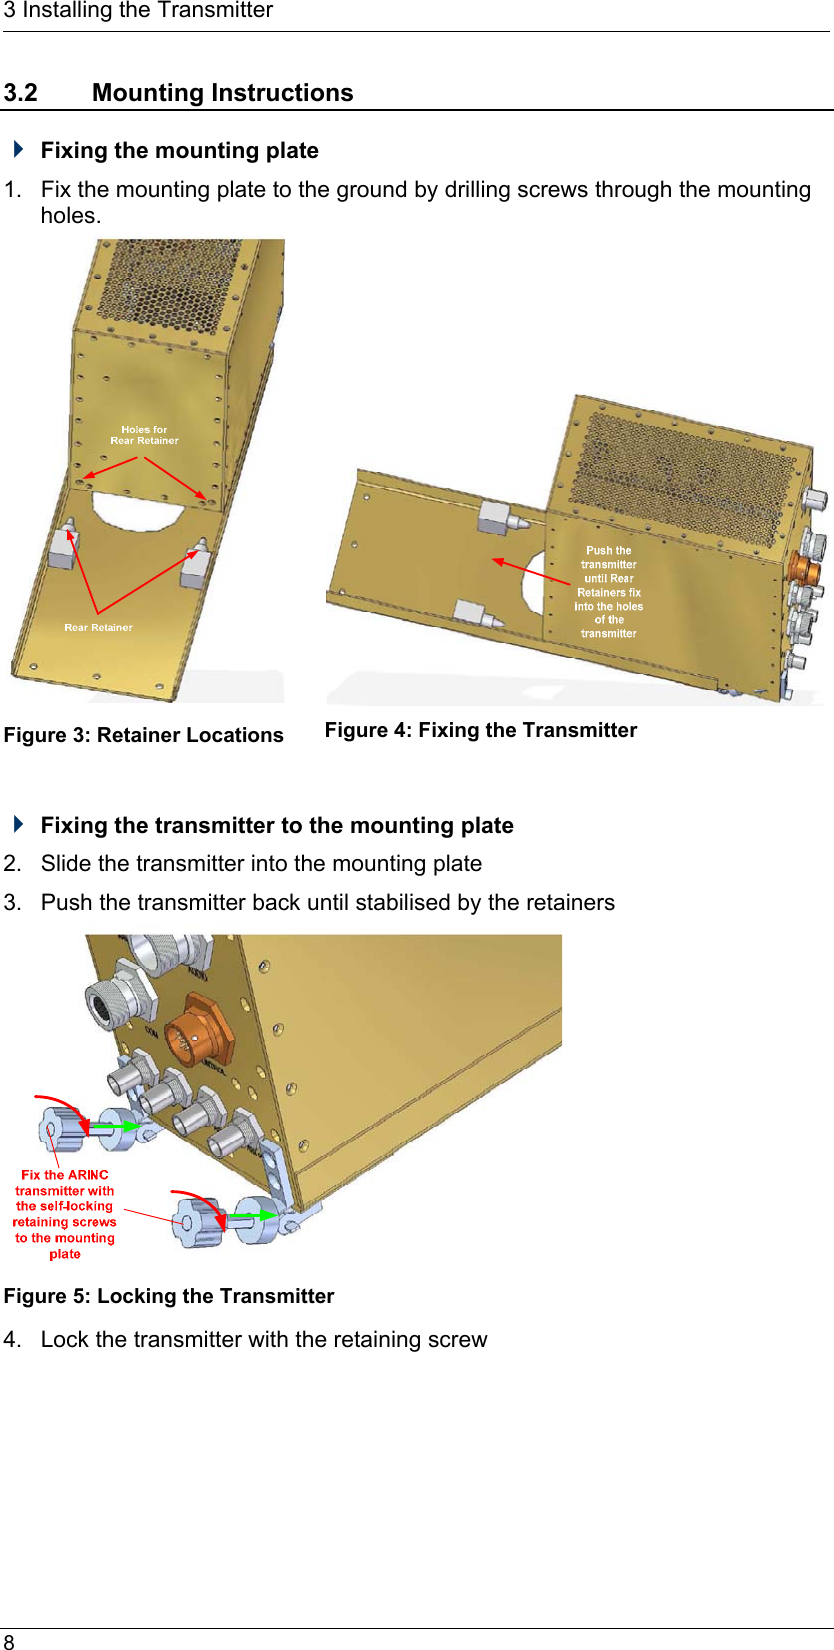  8  3 Installing the Transmitter 3.2 Mounting Instructions  Fixing the mounting plate 1.  Fix the mounting plate to the ground by drilling screws through the mounting holes.  Figure 3: Retainer Locations      Figure 4: Fixing the Transmitter   Fixing the transmitter to the mounting plate  2.  Slide the transmitter into the mounting plate 3.  Push the transmitter back until stabilised by the retainers  Figure 5: Locking the Transmitter 4.  Lock the transmitter with the retaining screw 